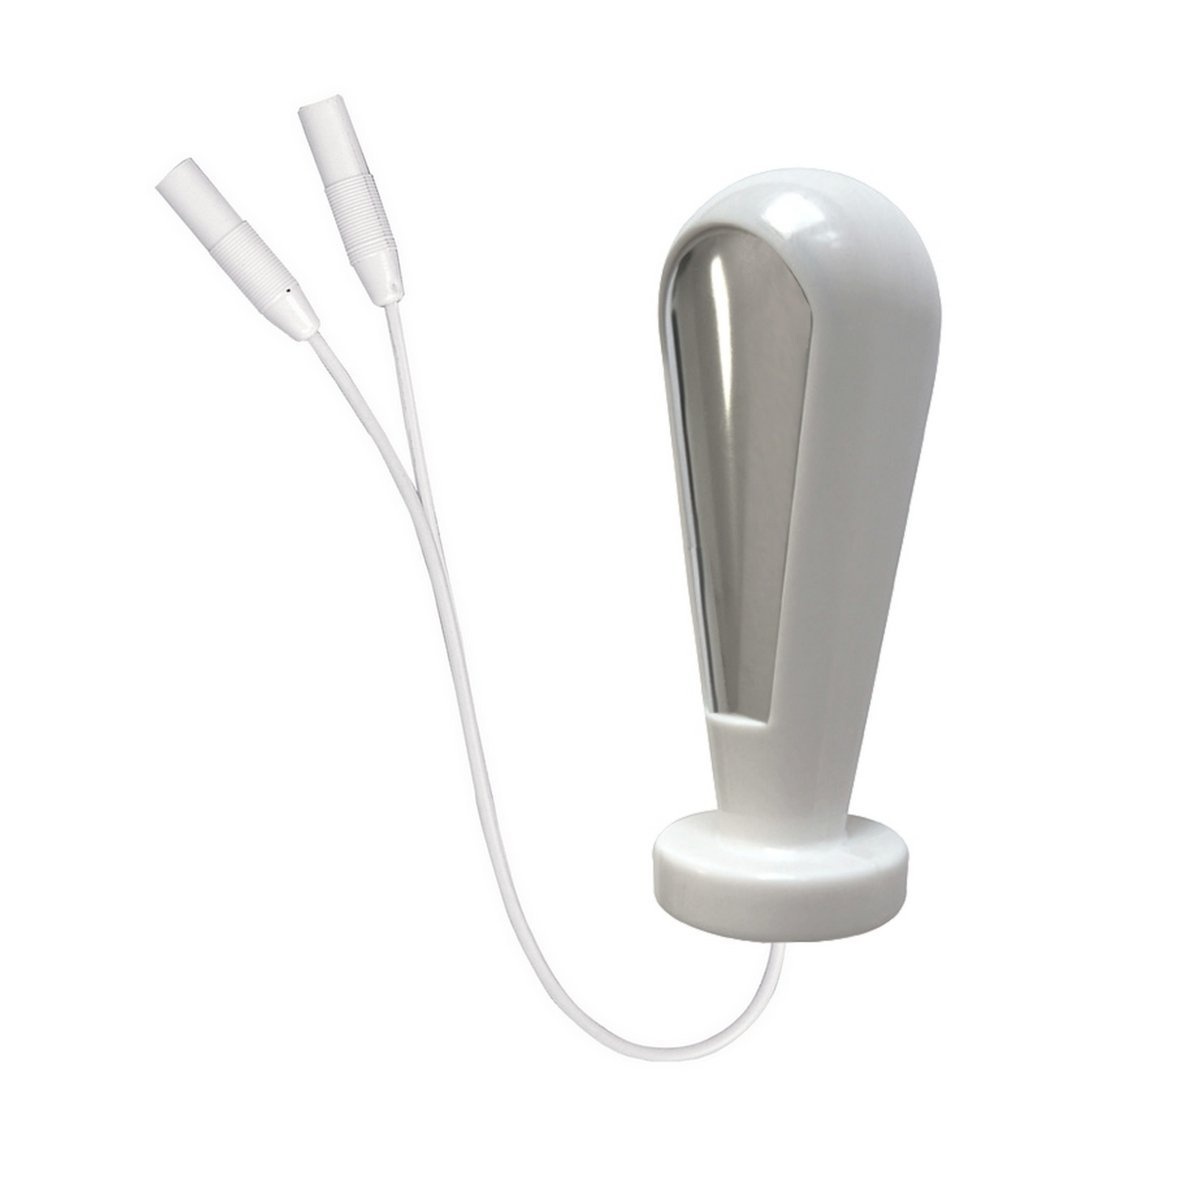 Incontinence Vaginal Probe for use with ALLPFS